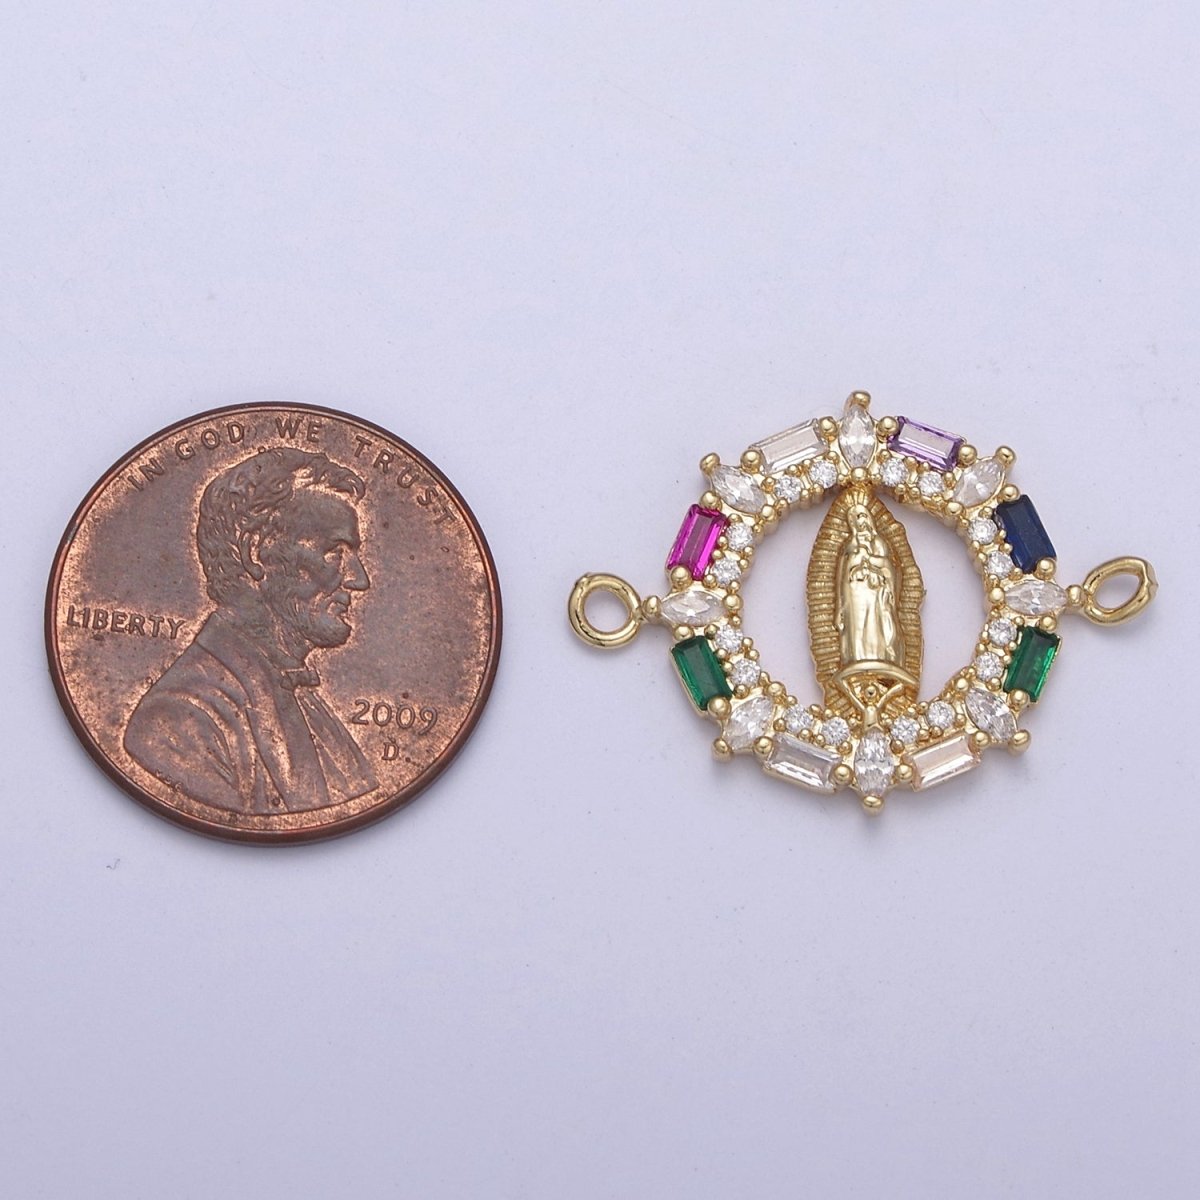 Virgin of Guadalupe Virgin Mary Charm Connector for bracelet, religious jewelry supply F-172 - DLUXCA